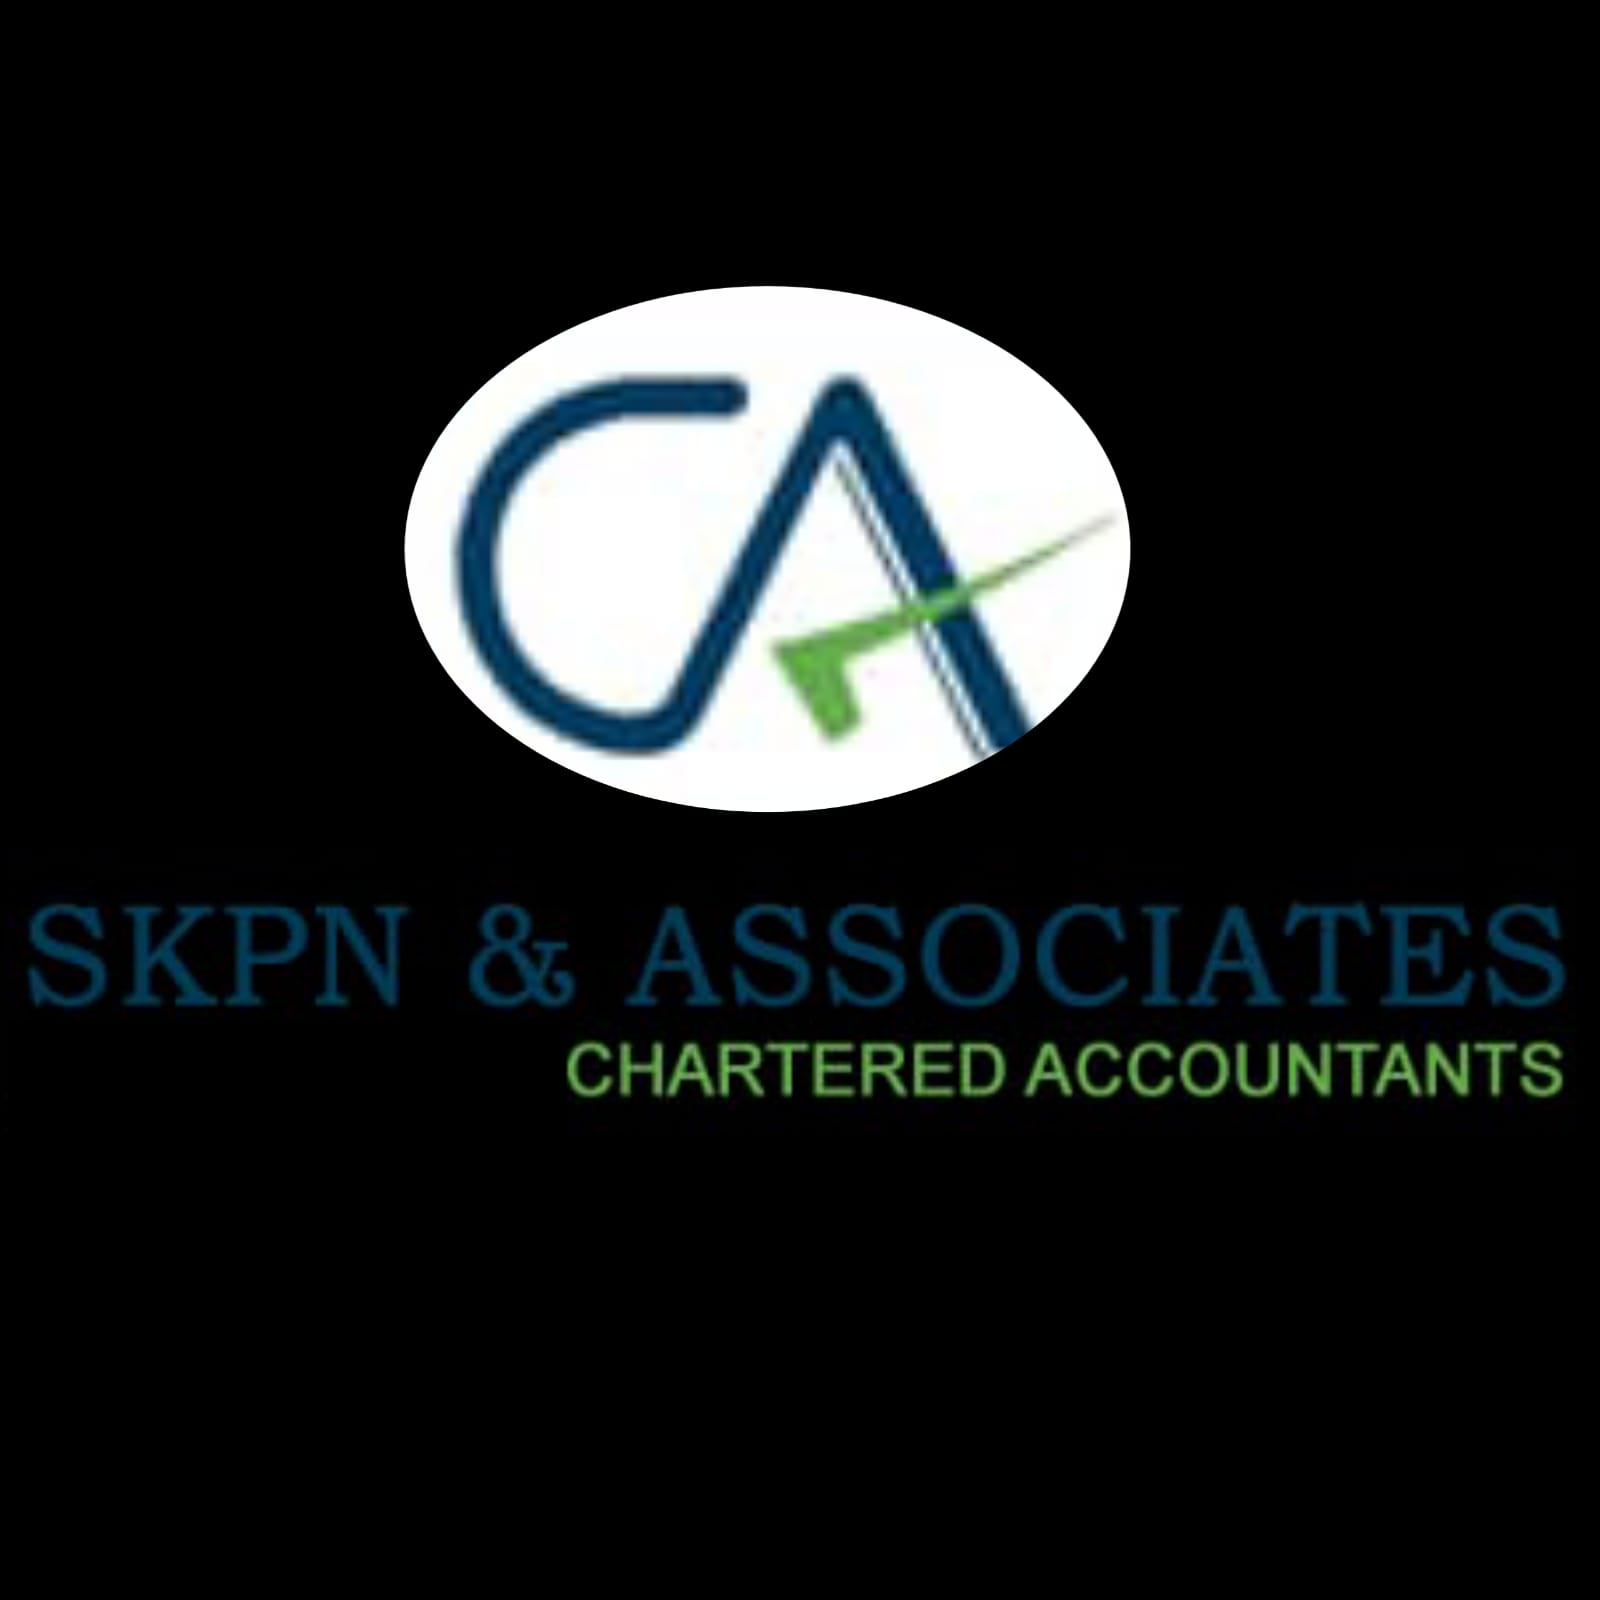 Skpn & Associates Chartered Accountant|Accounting Services|Professional Services